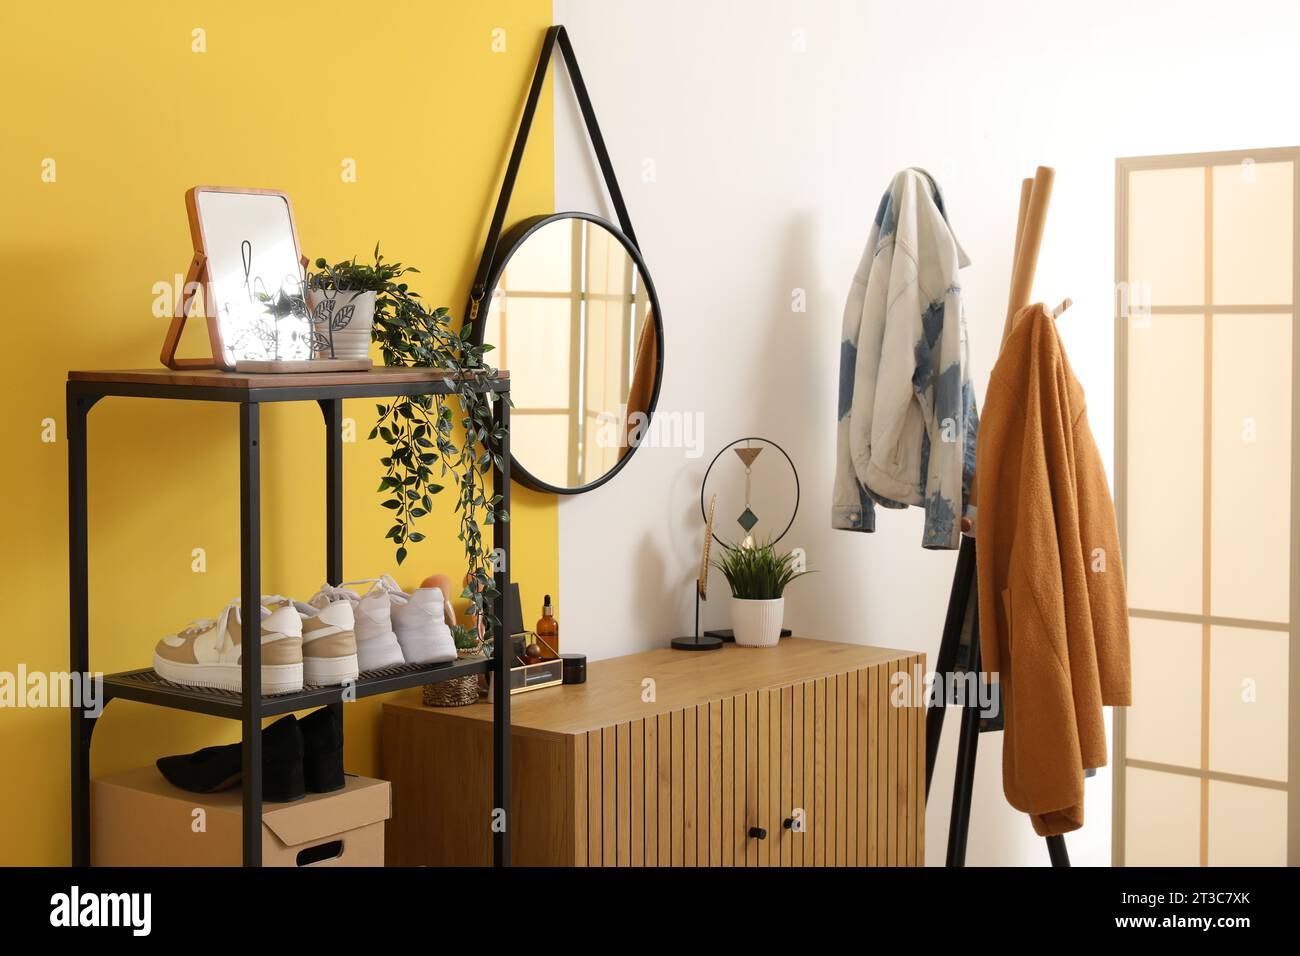 Interior of stylish hallway with mirror, wooden cabinet, shoe stand and rack Stock Photo